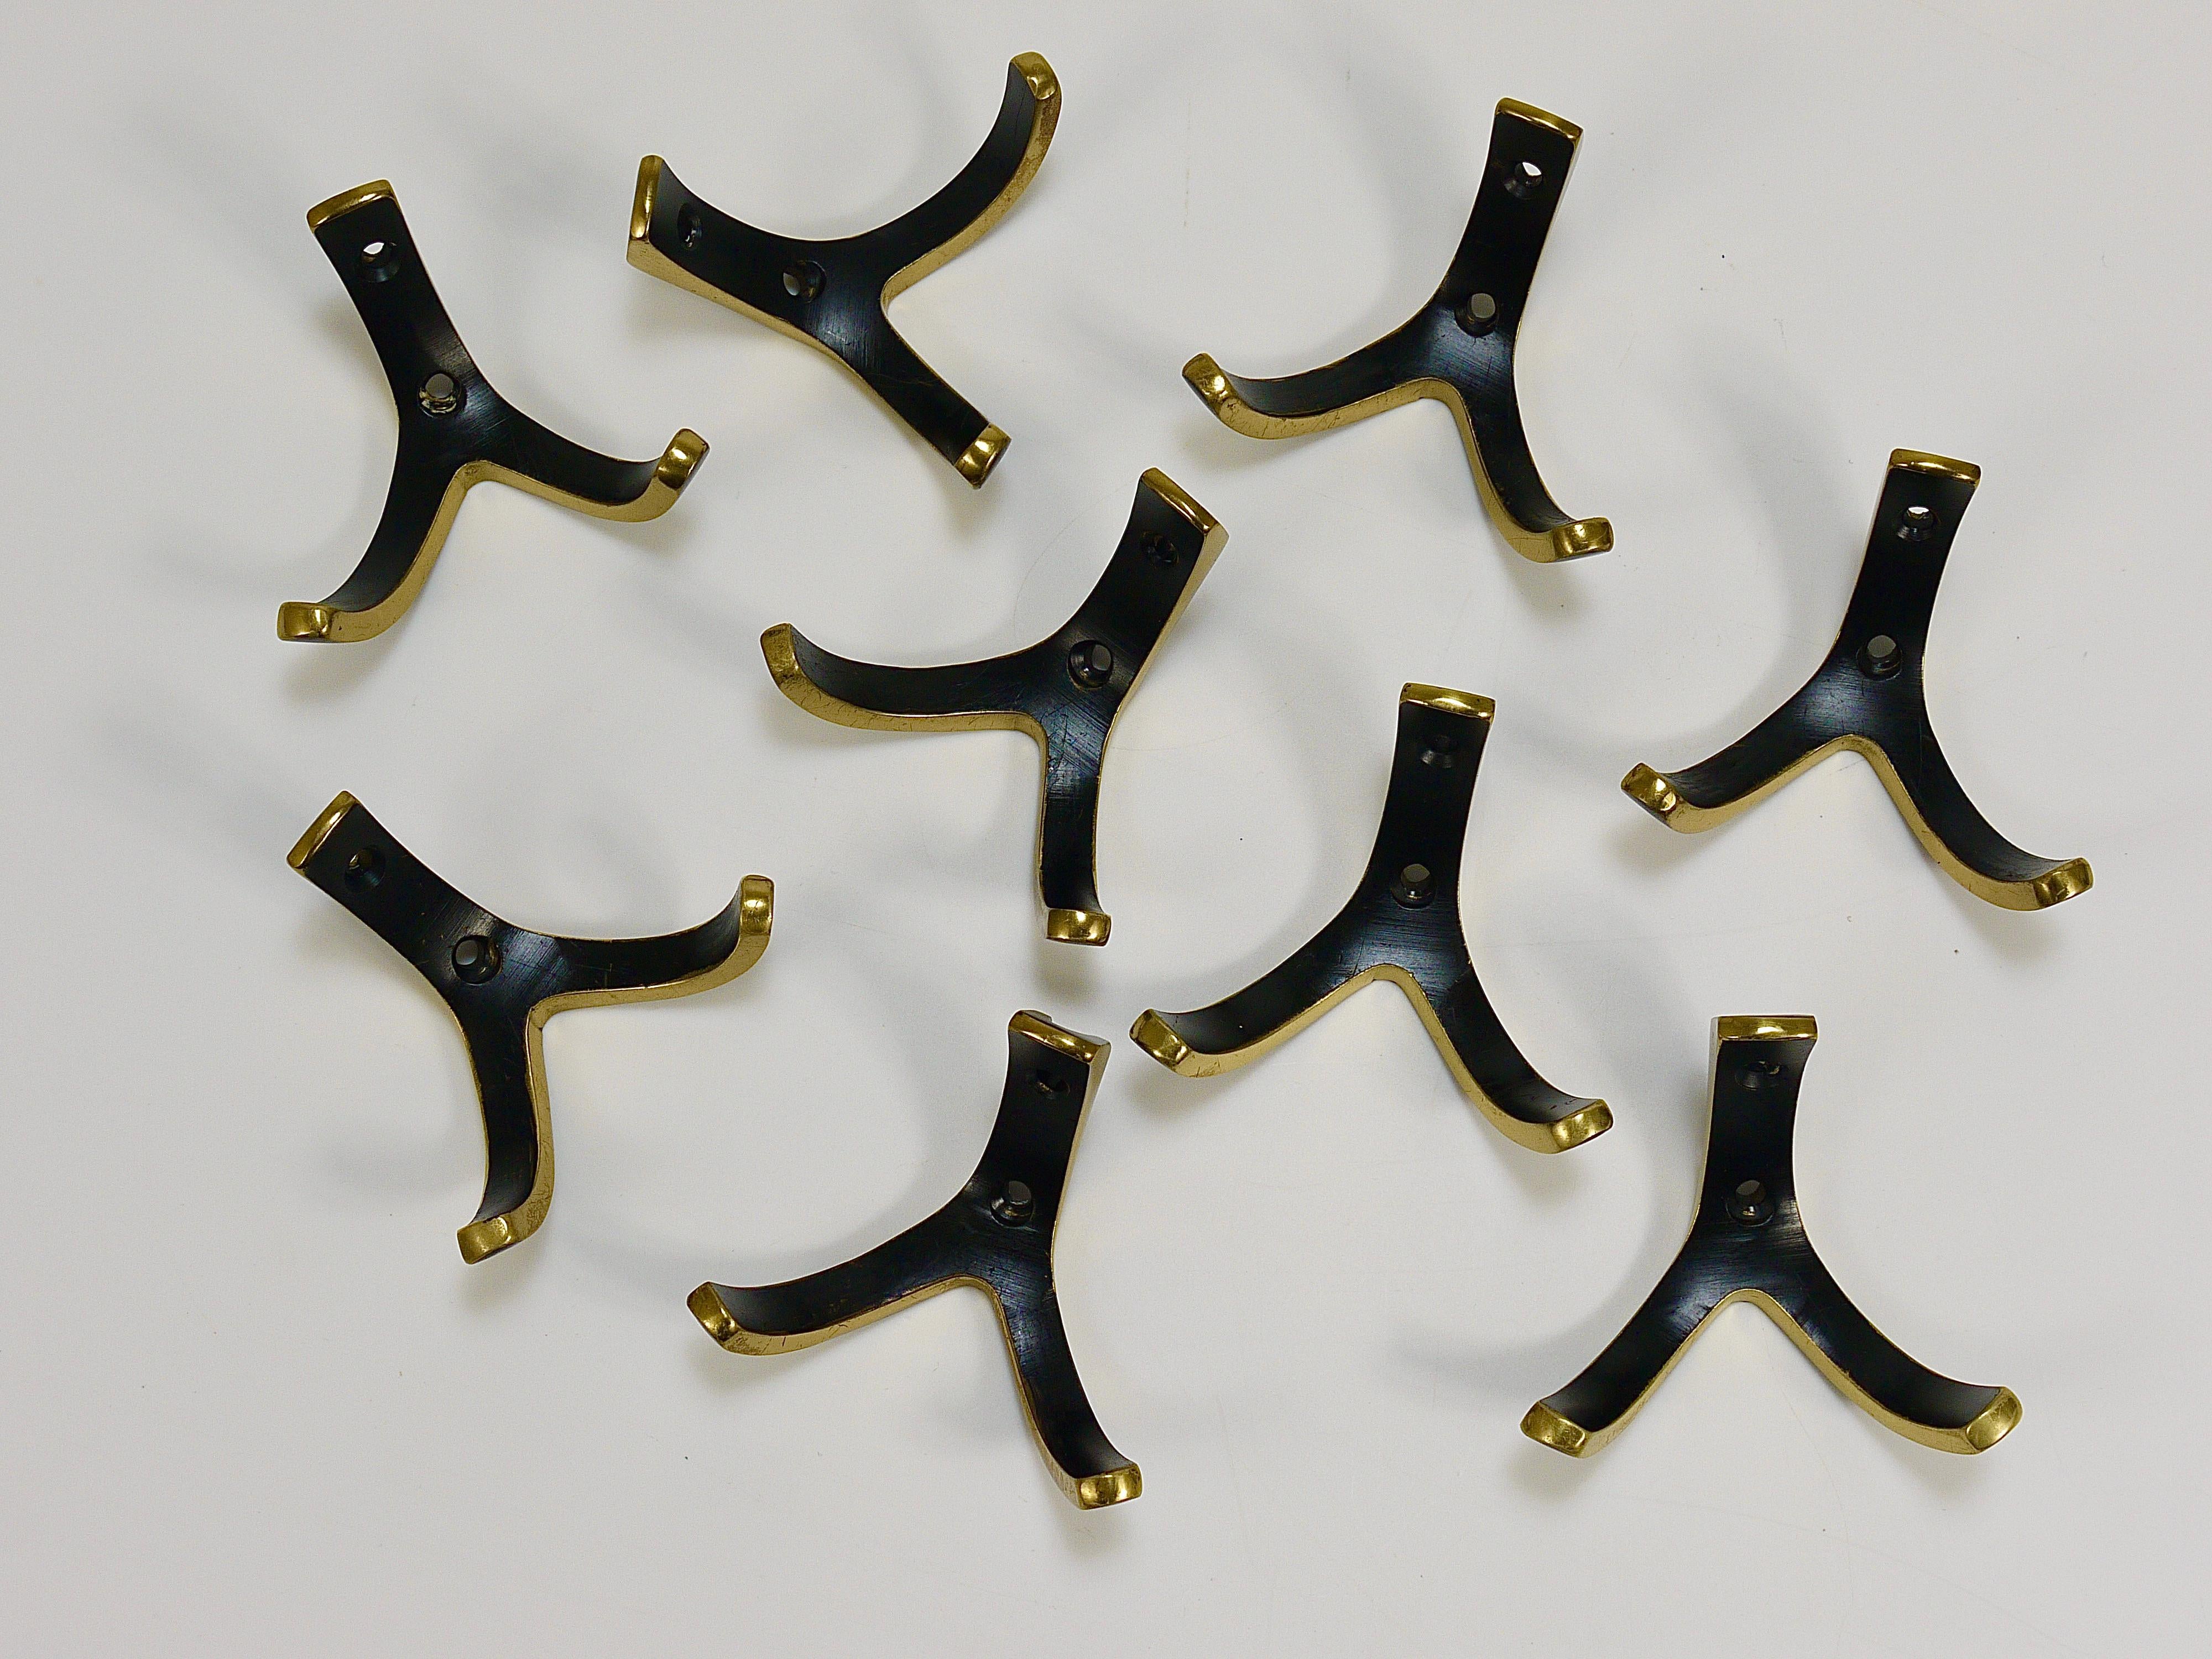 Up to 8 beautiful modernist wall hooks from the 1950s, made of solid black-finished and partly polished brass. Executed by Hertha Baller Vienna in  Austria. To be used as coat hooks, but also for towels in the bathroom or in the kitchen. In very